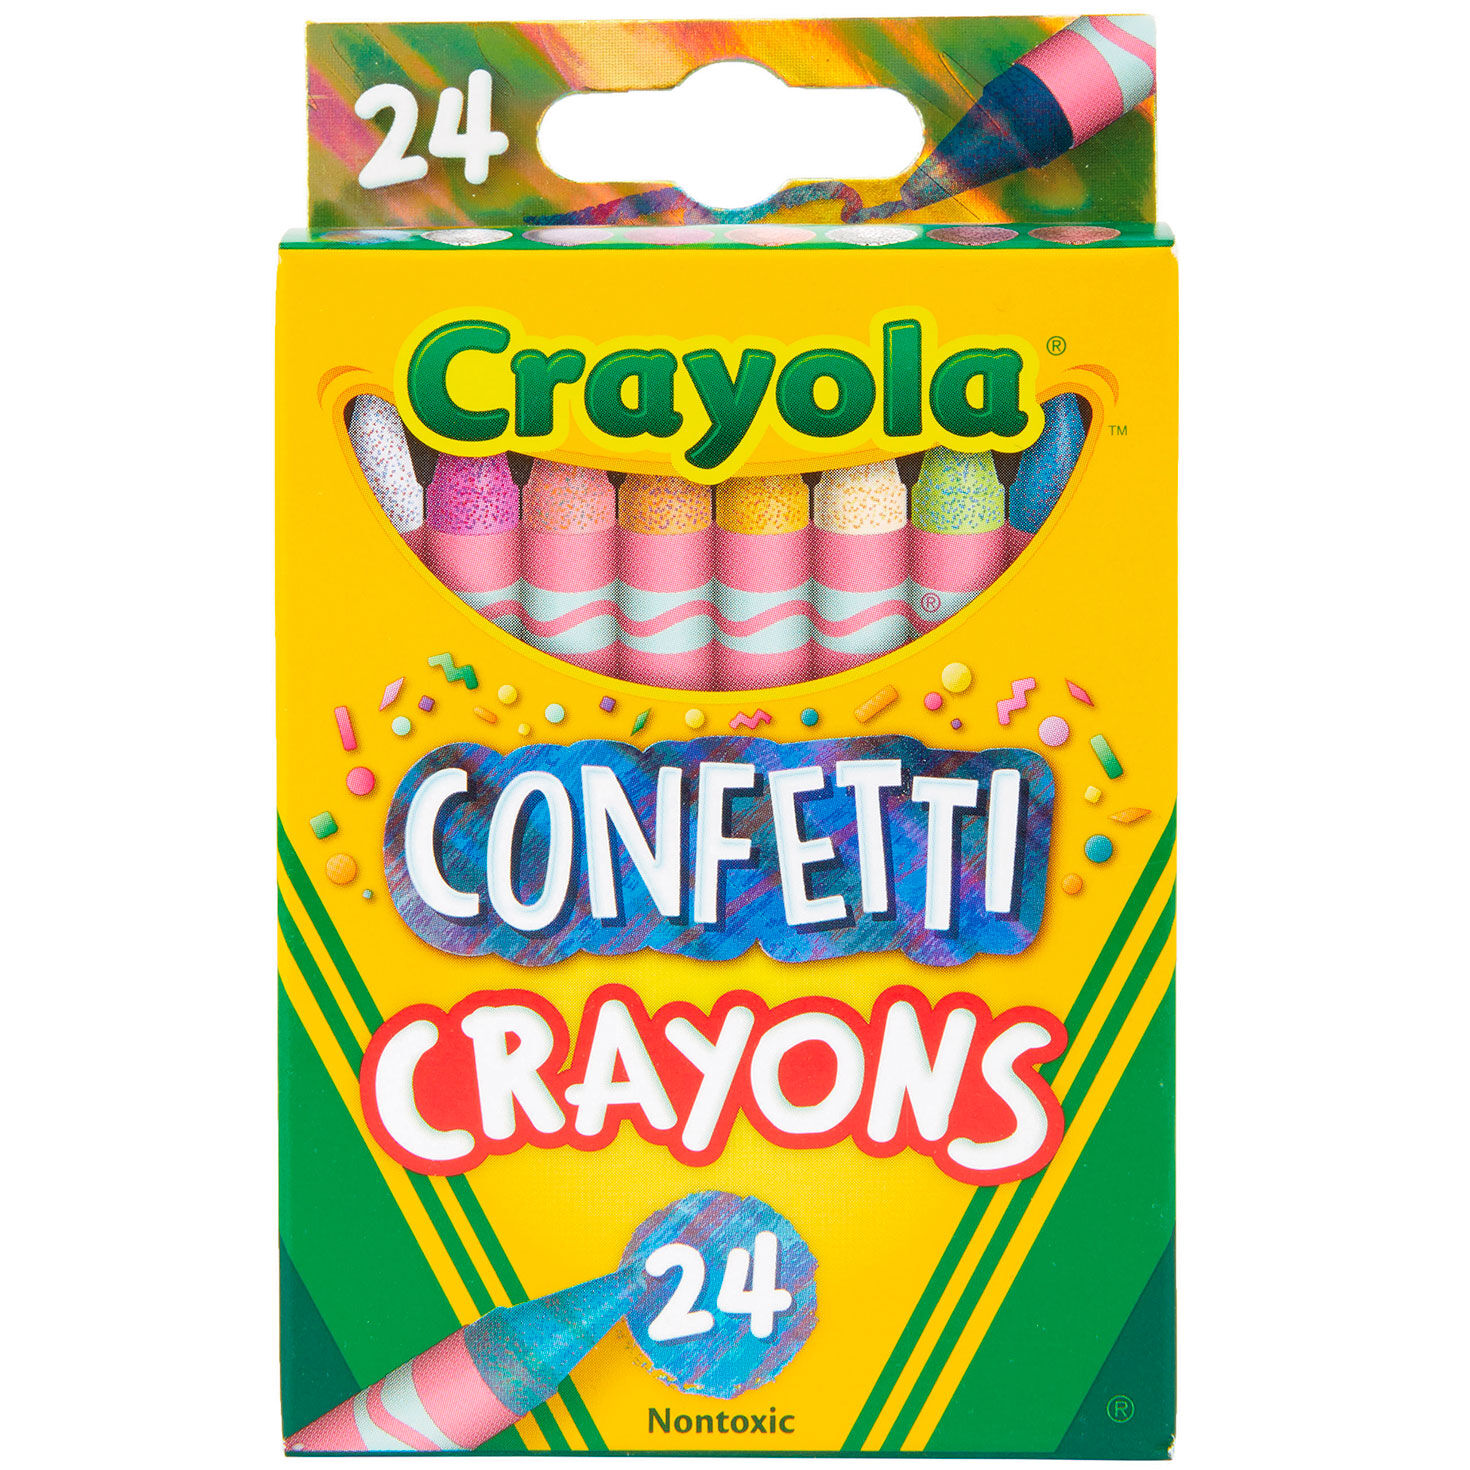 Crayola Bathtub Crayons, Assorted Colors 9 Count (Pack of 2)